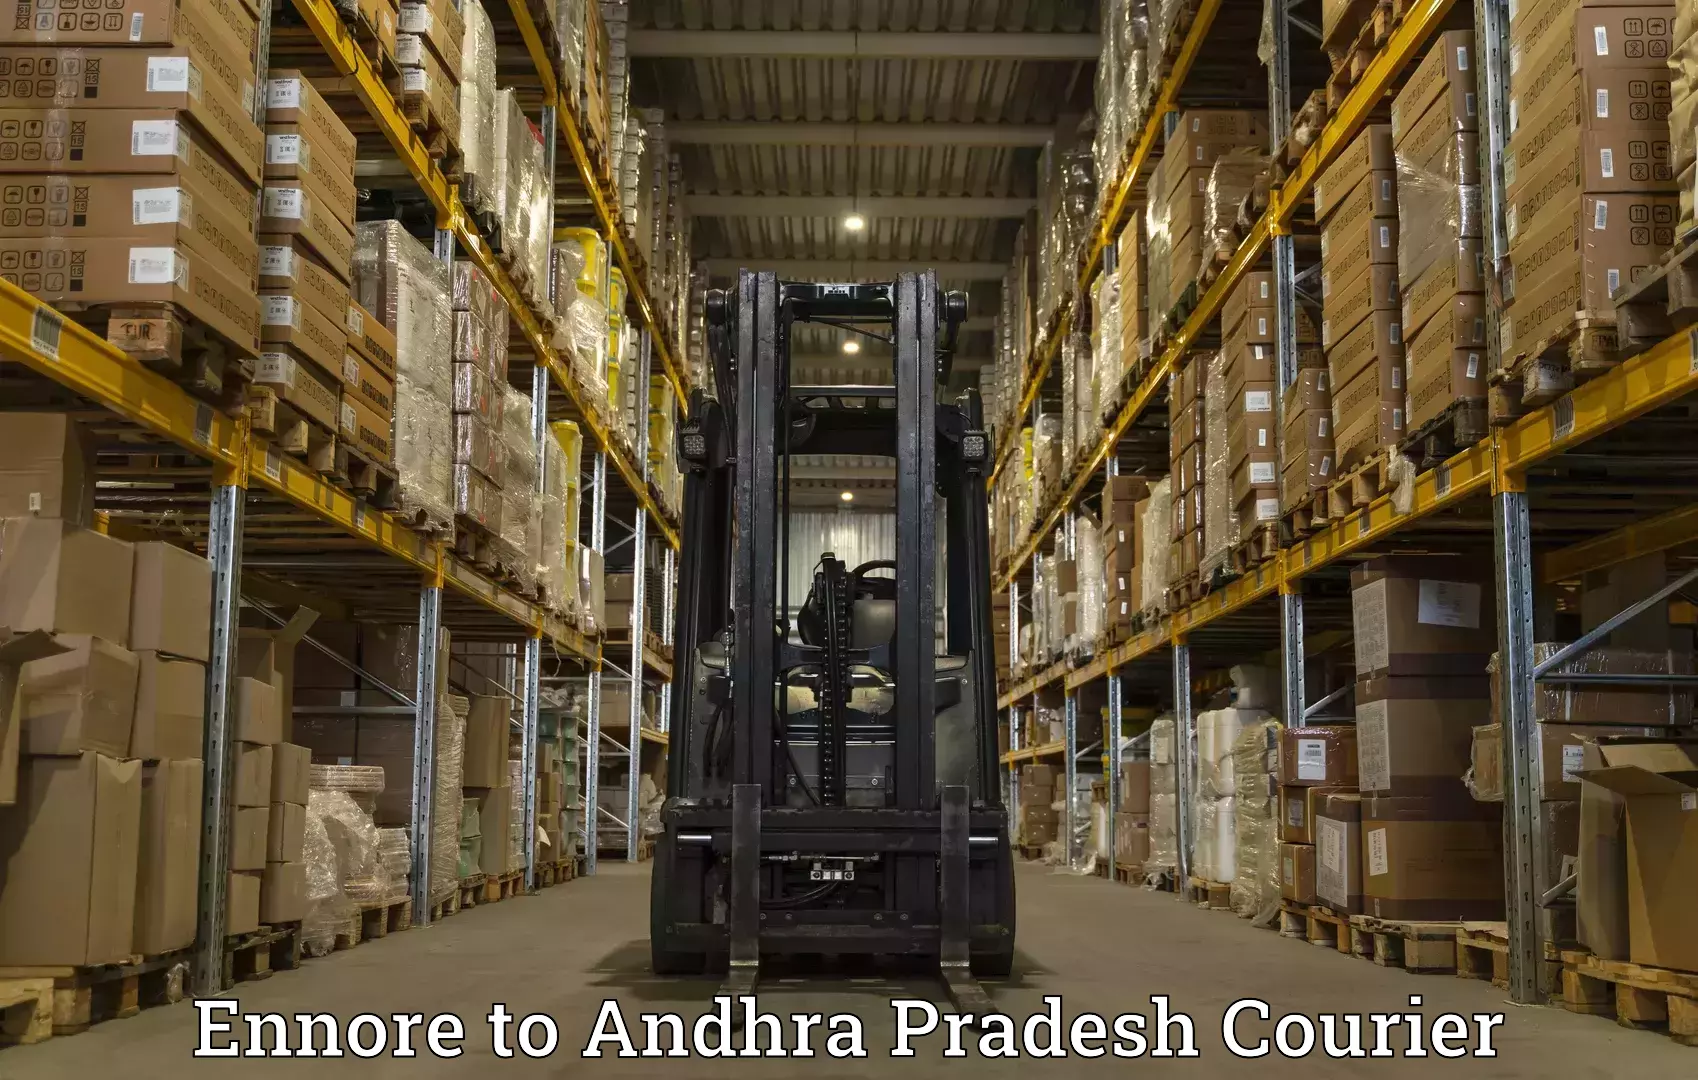 Full-service courier options Ennore to Tadikalapudi